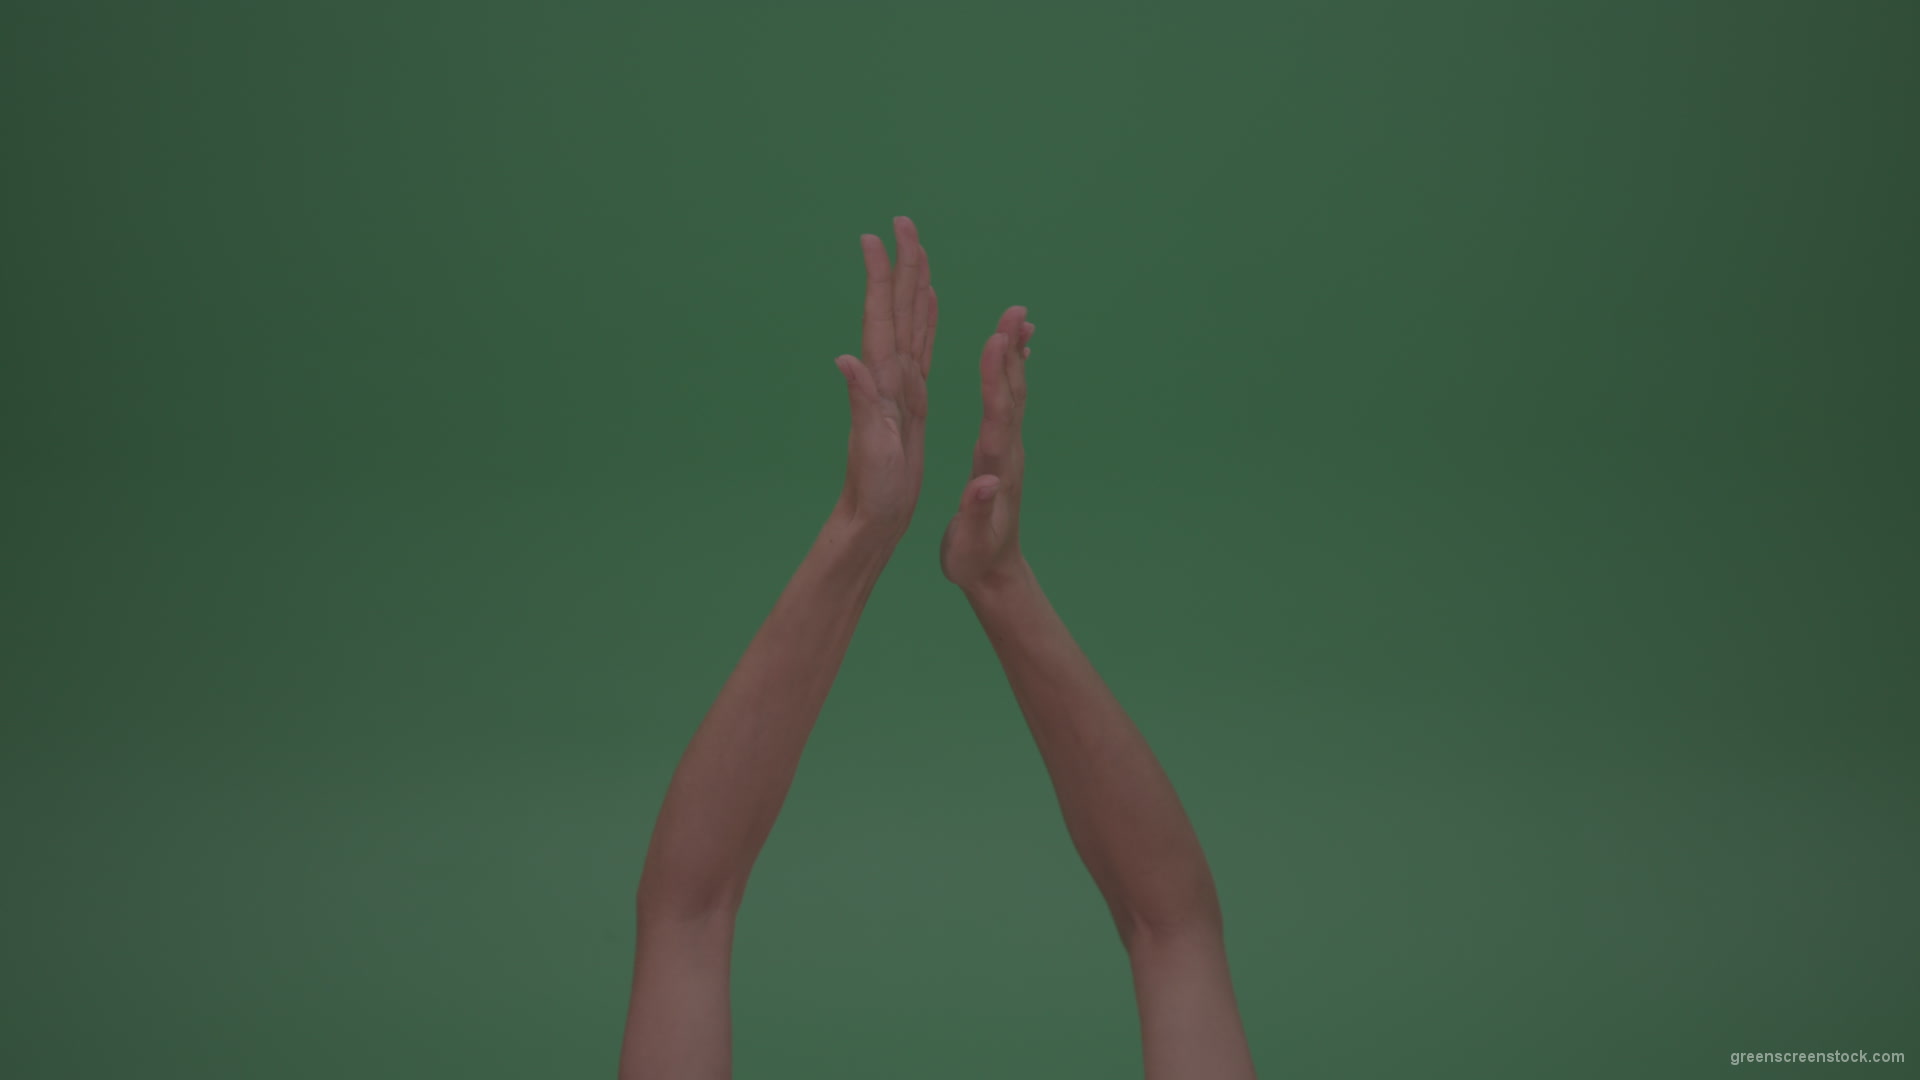 Rapidly-Clapping-Young-FemaleHands-Ovation-GreenScreenWall-ChromaKey-Background_007 Green Screen Stock